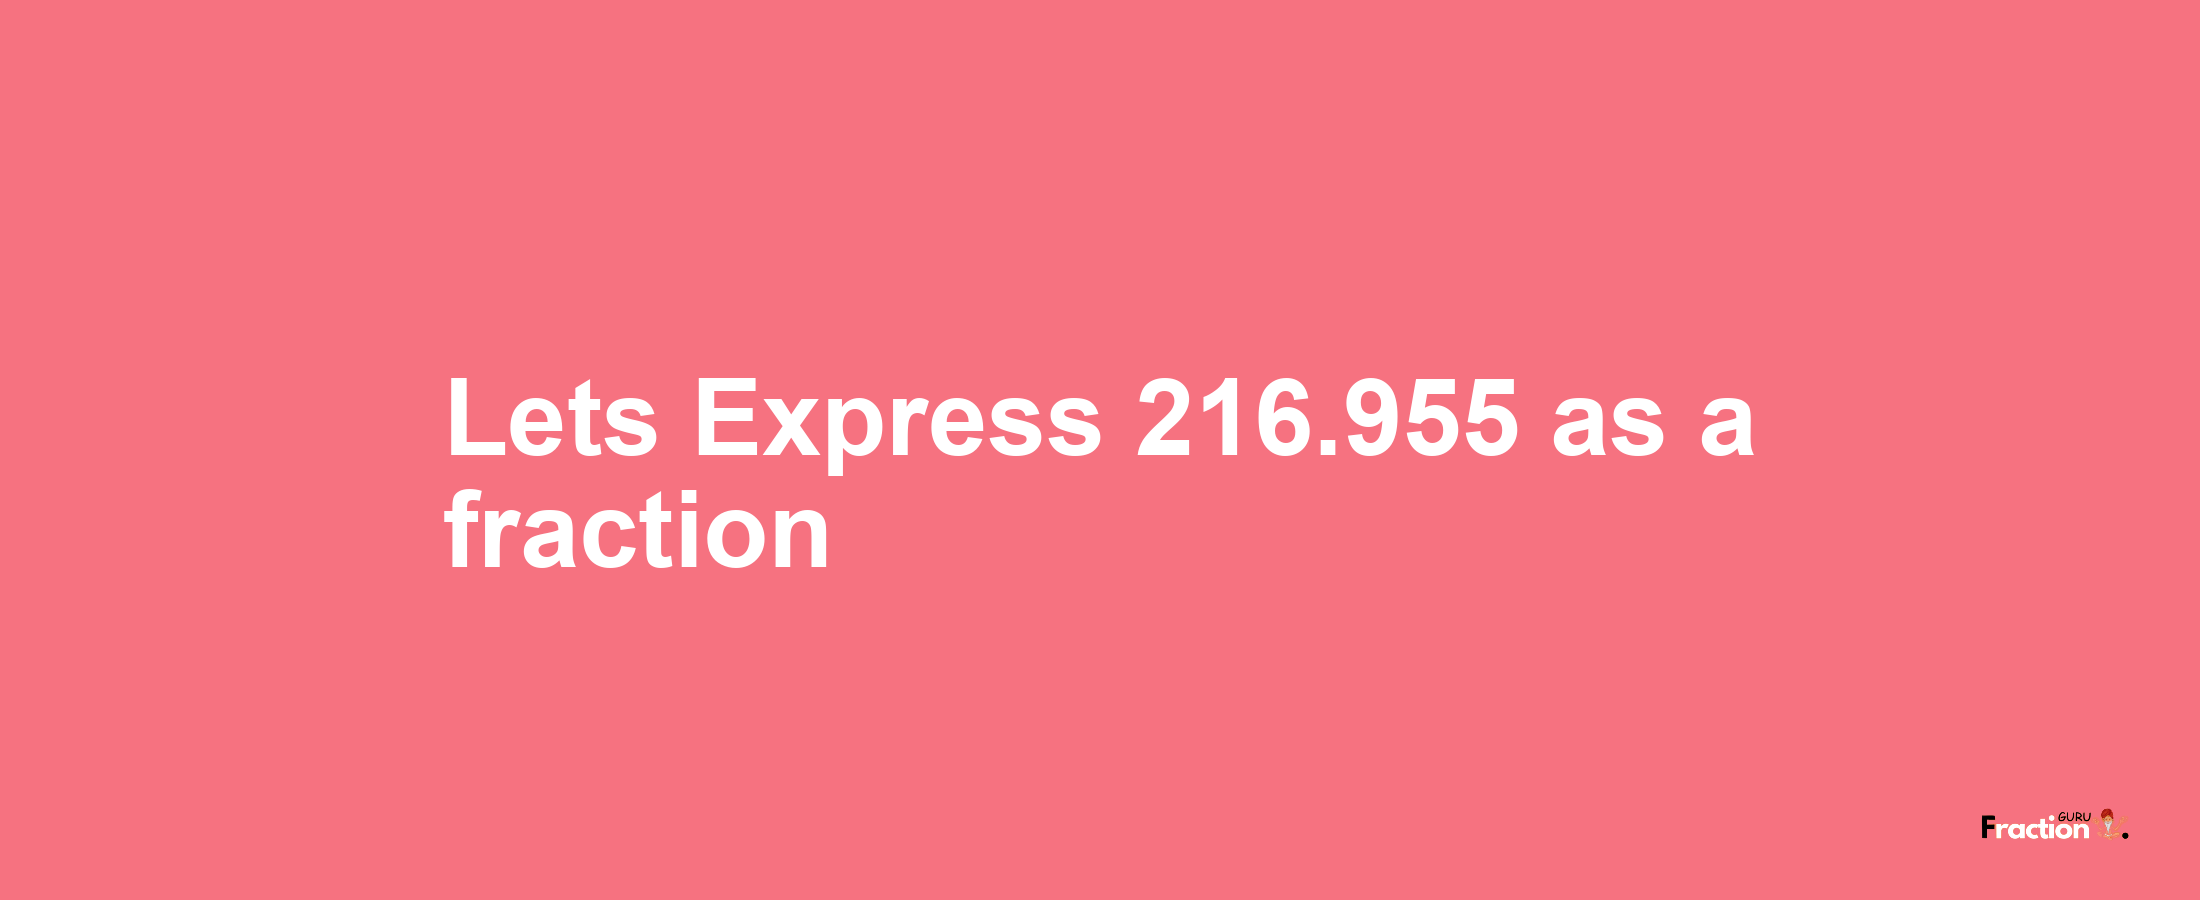 Lets Express 216.955 as afraction